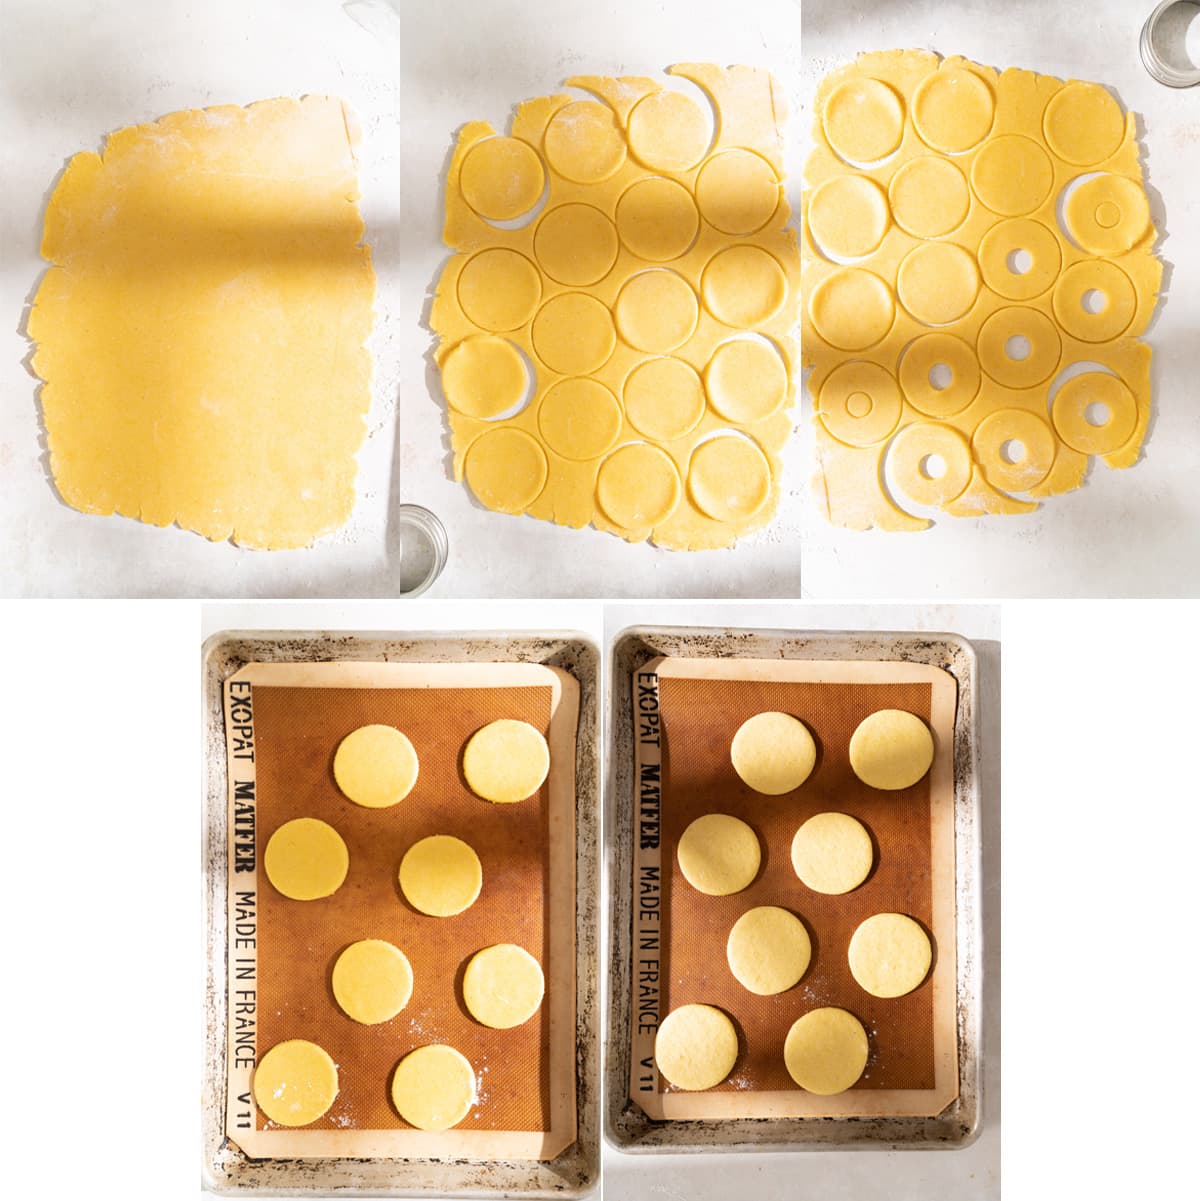 Process photos showing how to roll out, cut out, and bake the cookie dough. 